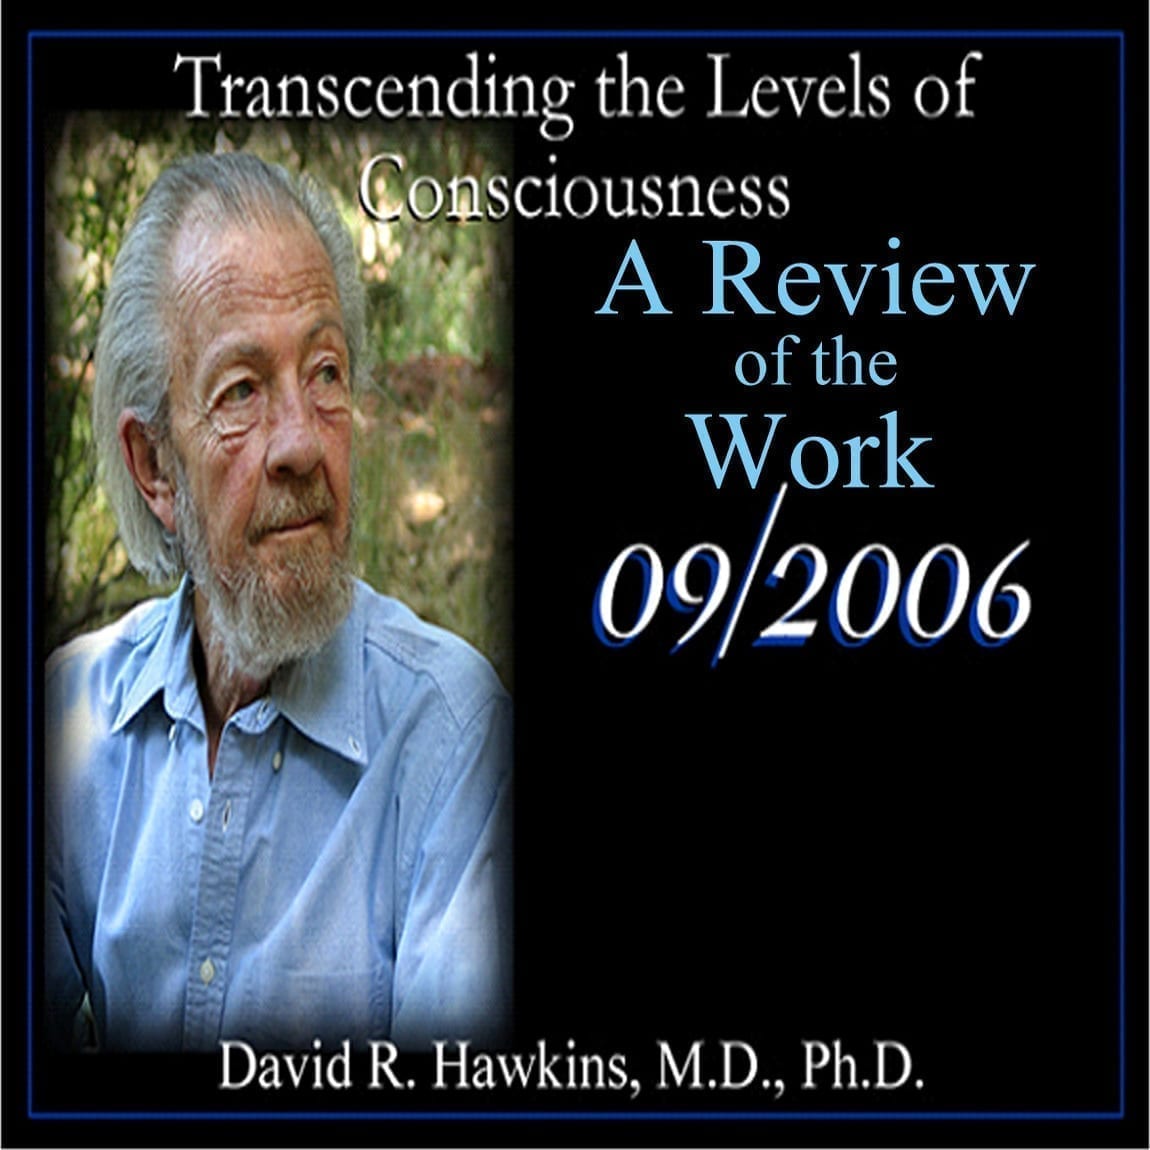 A Review of the Work  (Sep 2006)